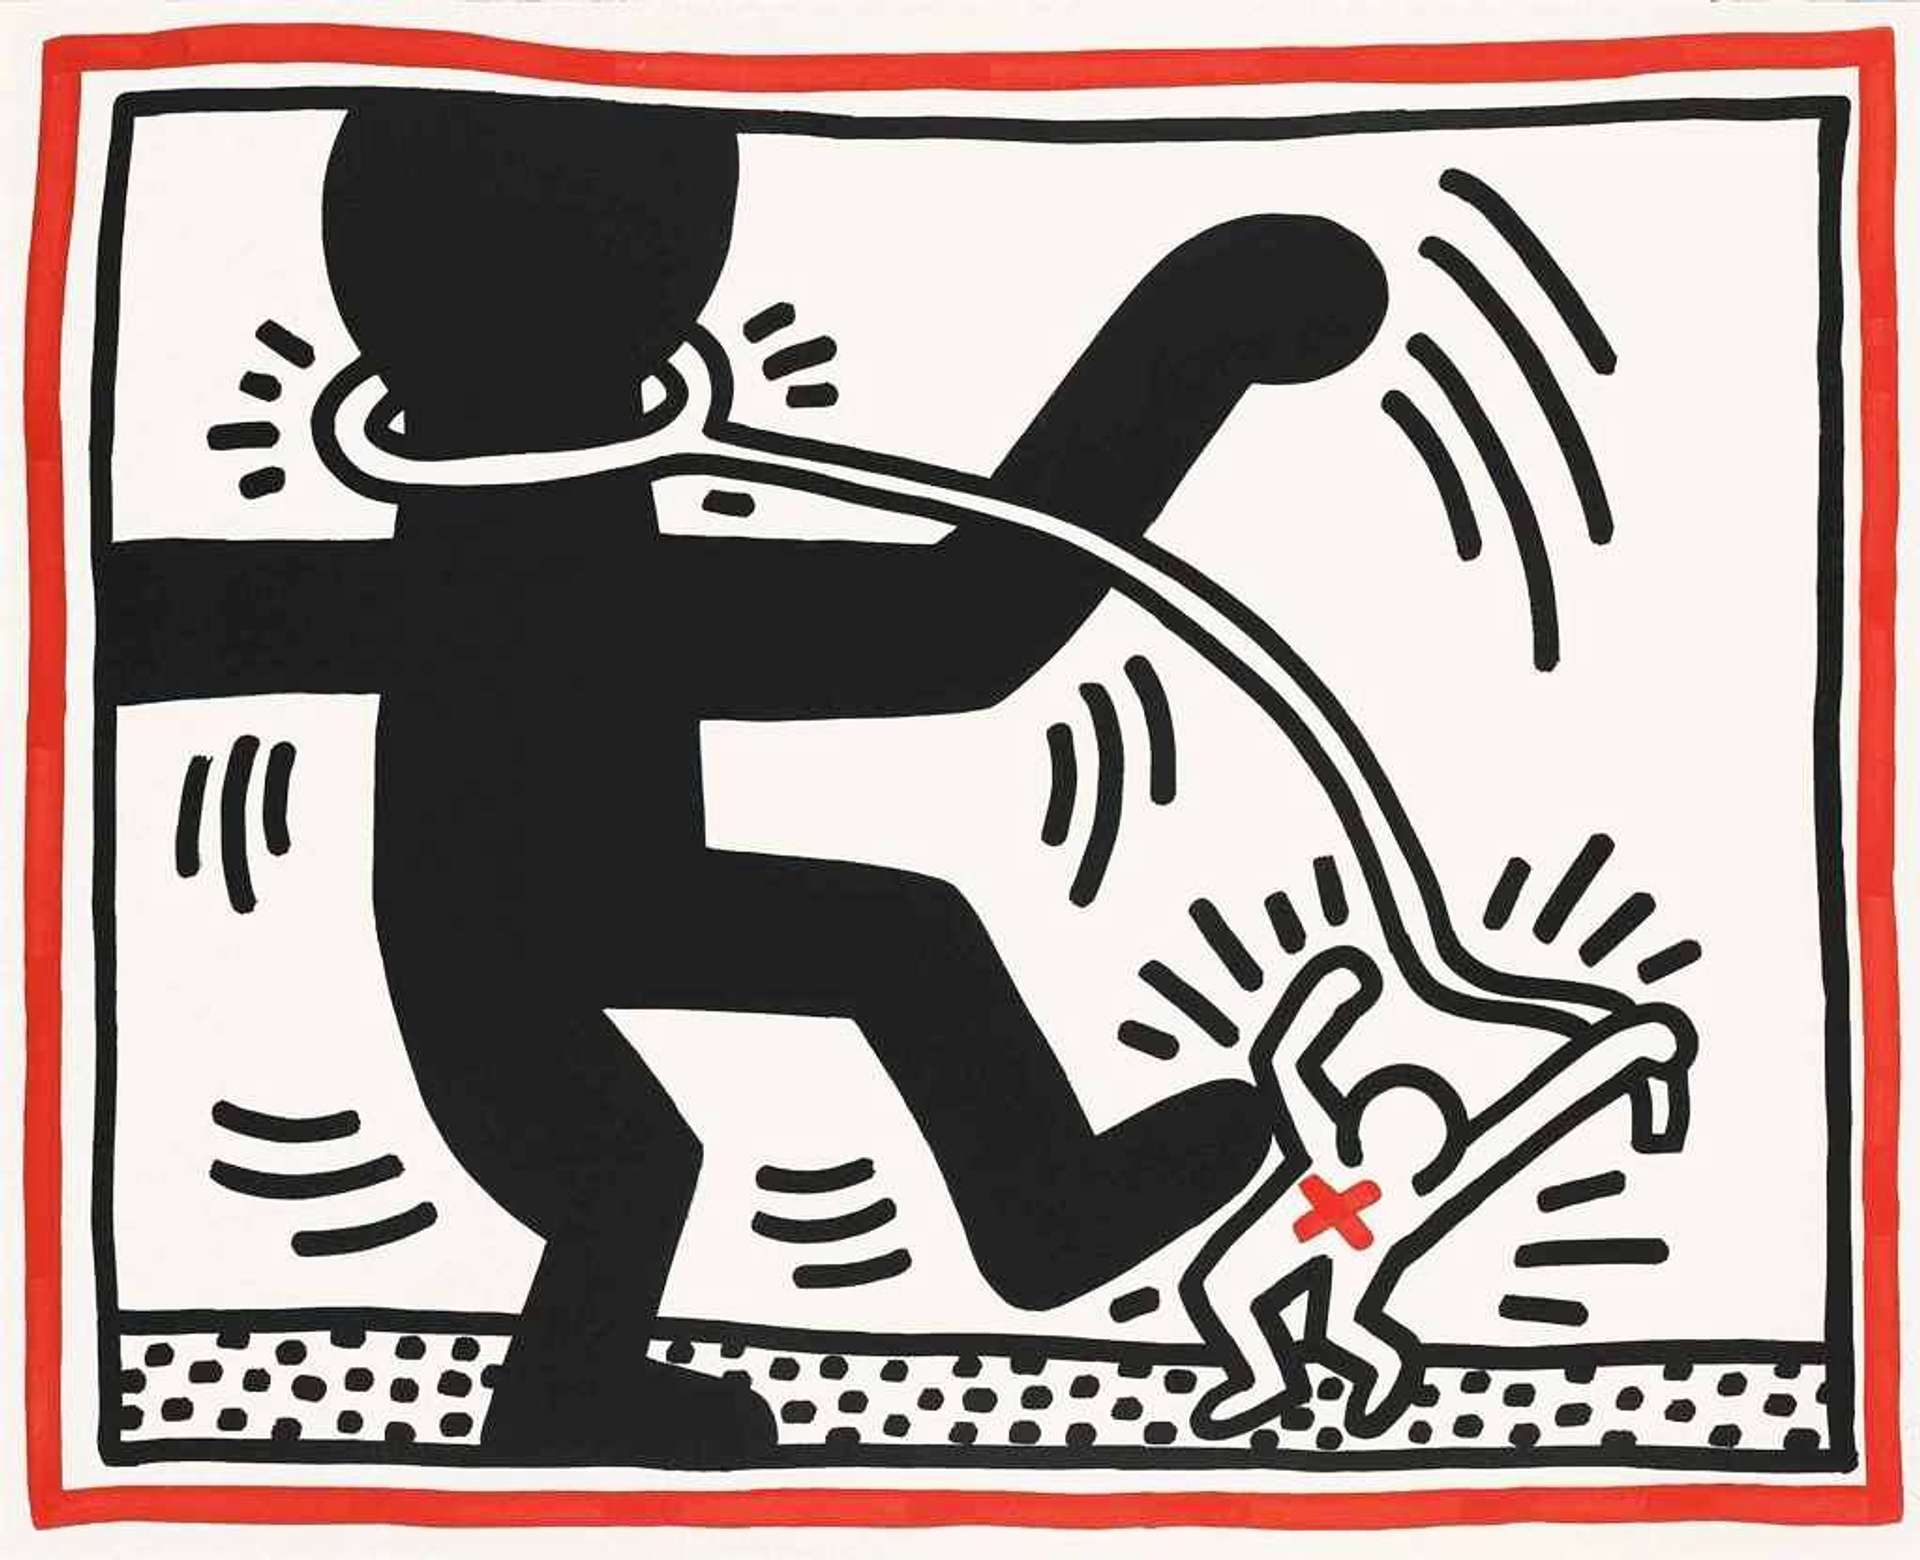 10 Facts About Keith Haring's Free South Africa